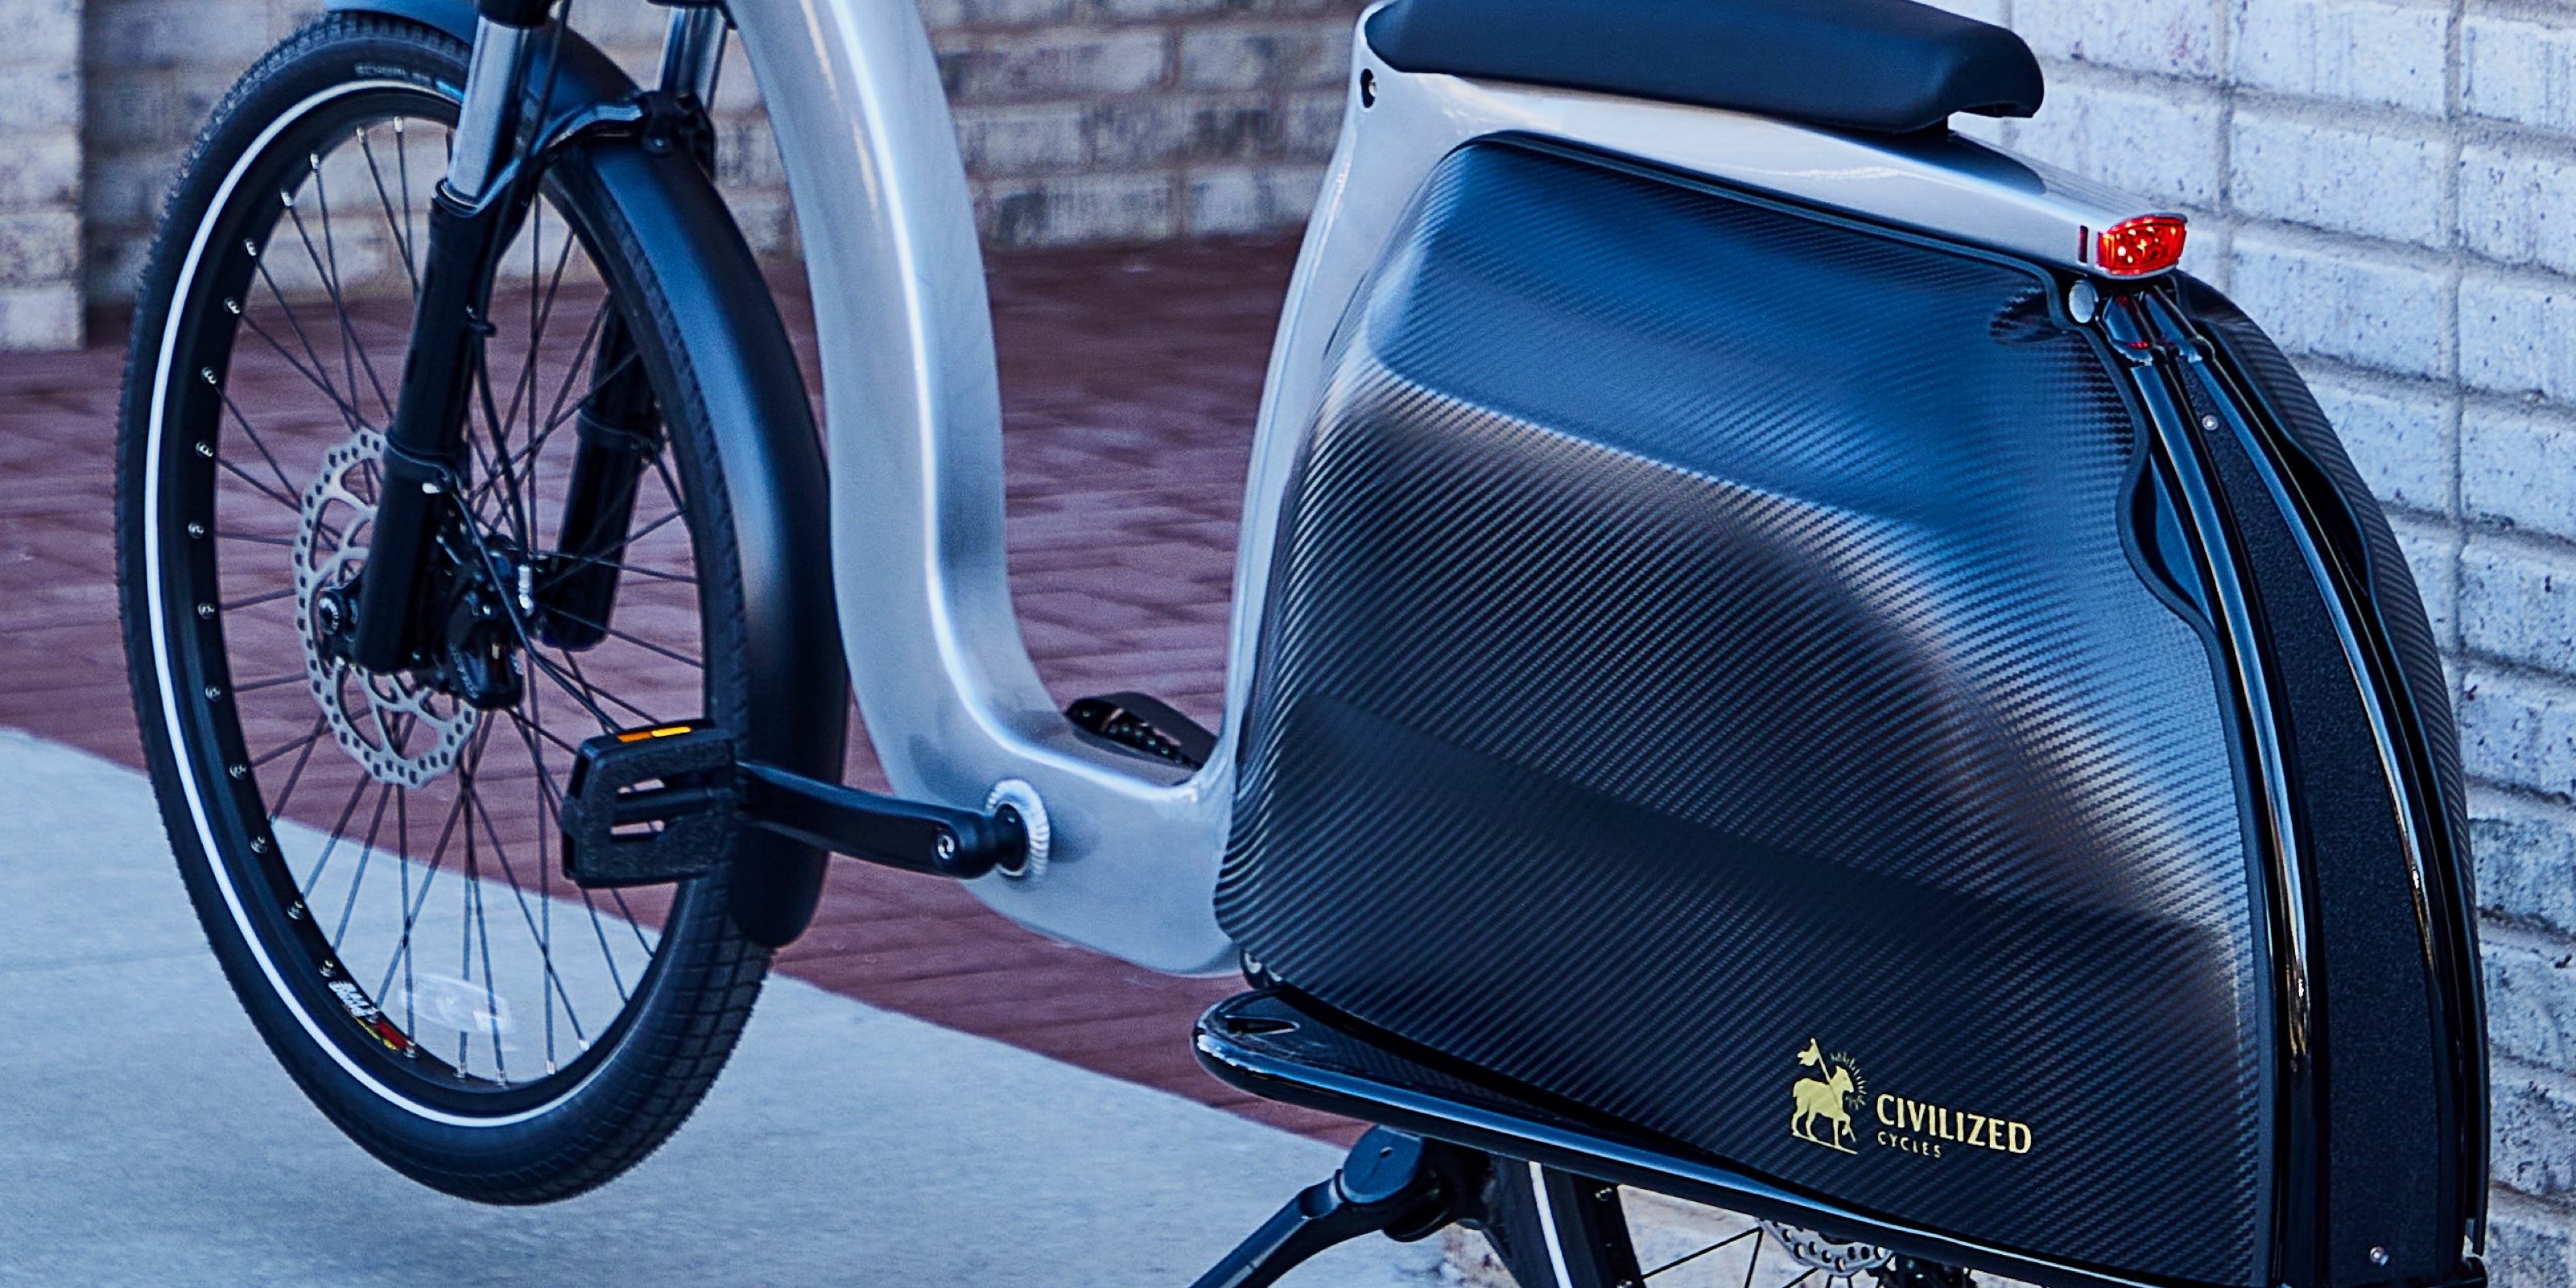 A detail shot of the frame and panniers of the Civ.